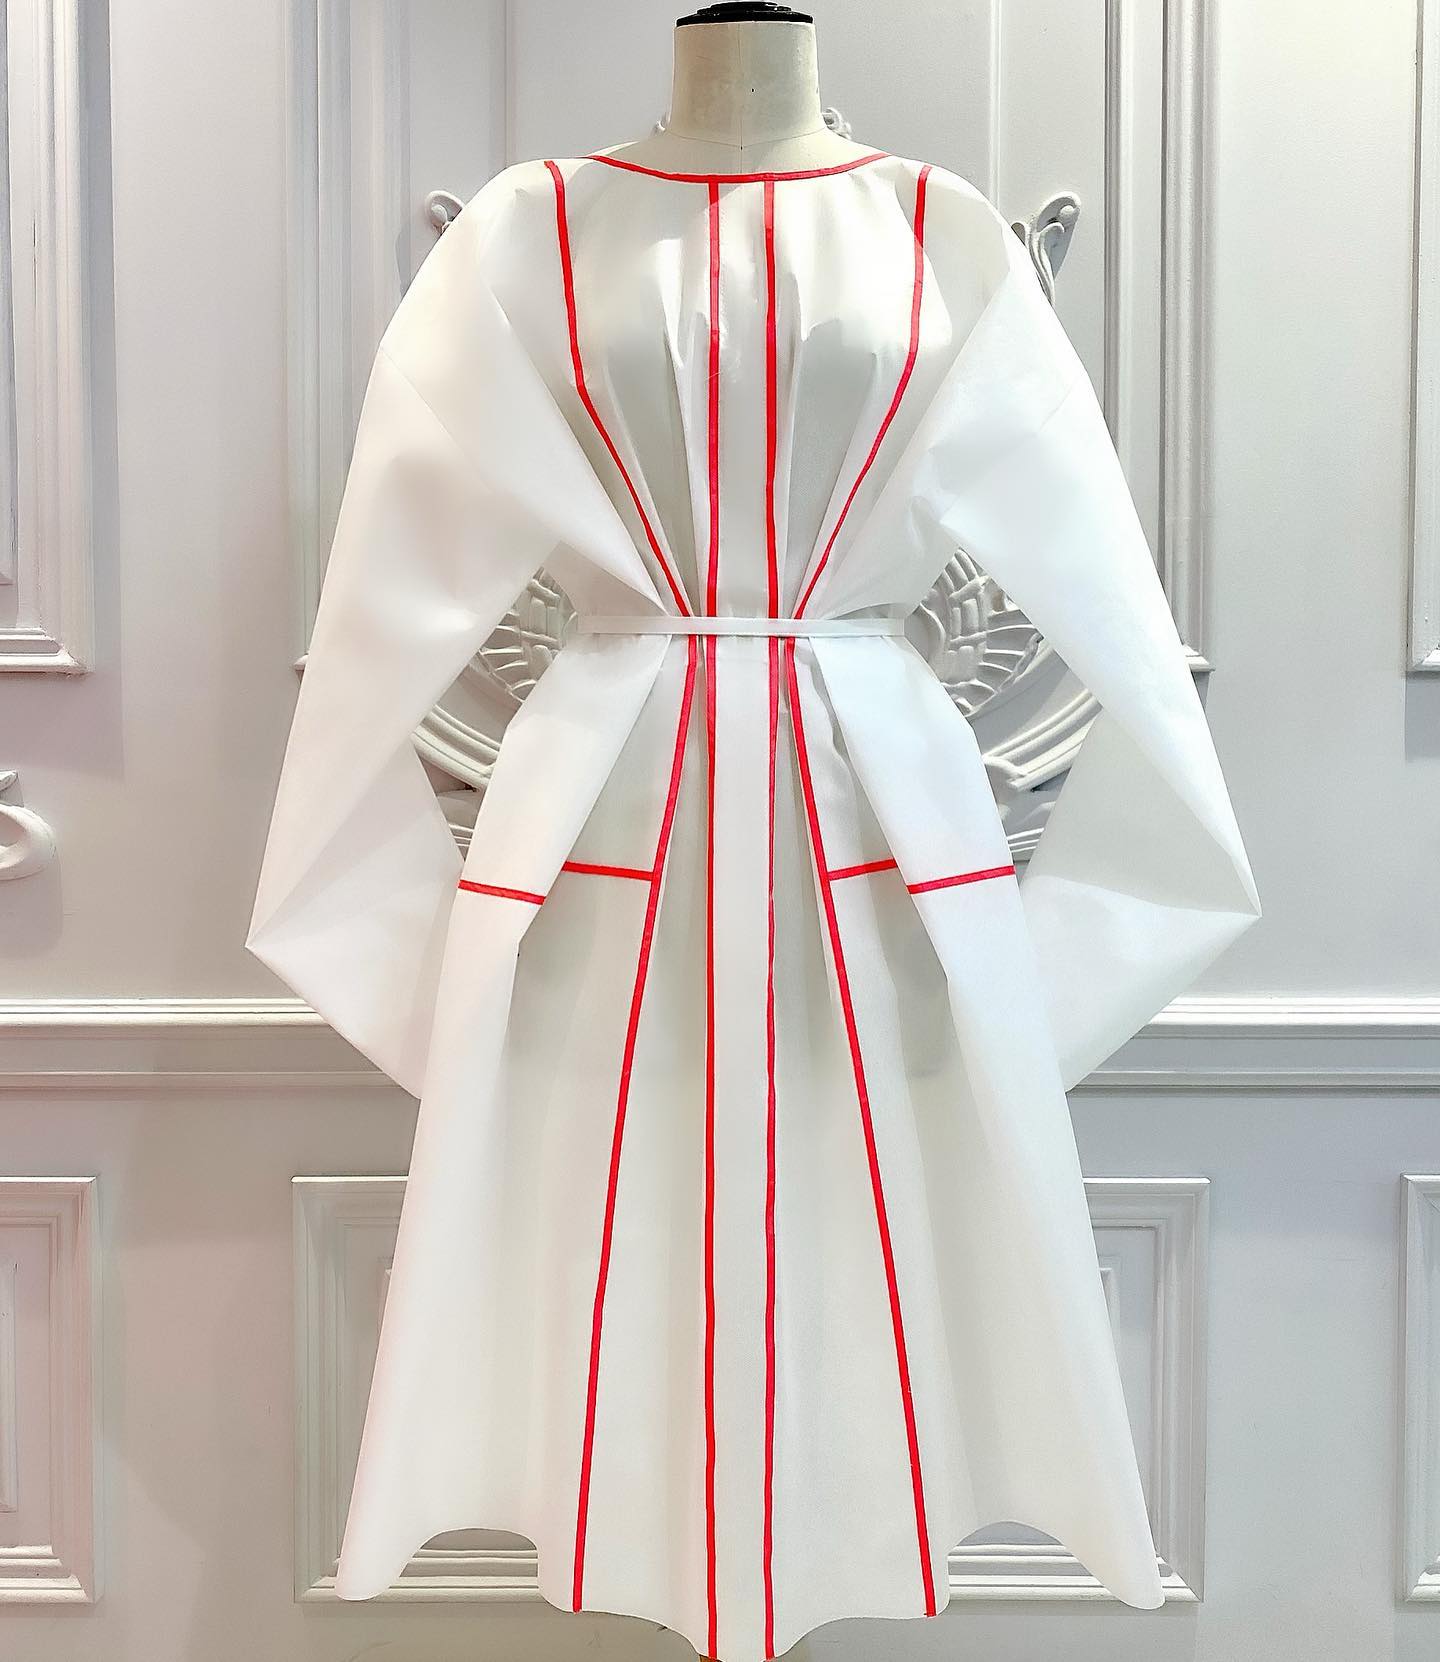 Michael Cinco's protective lab gown in red and white